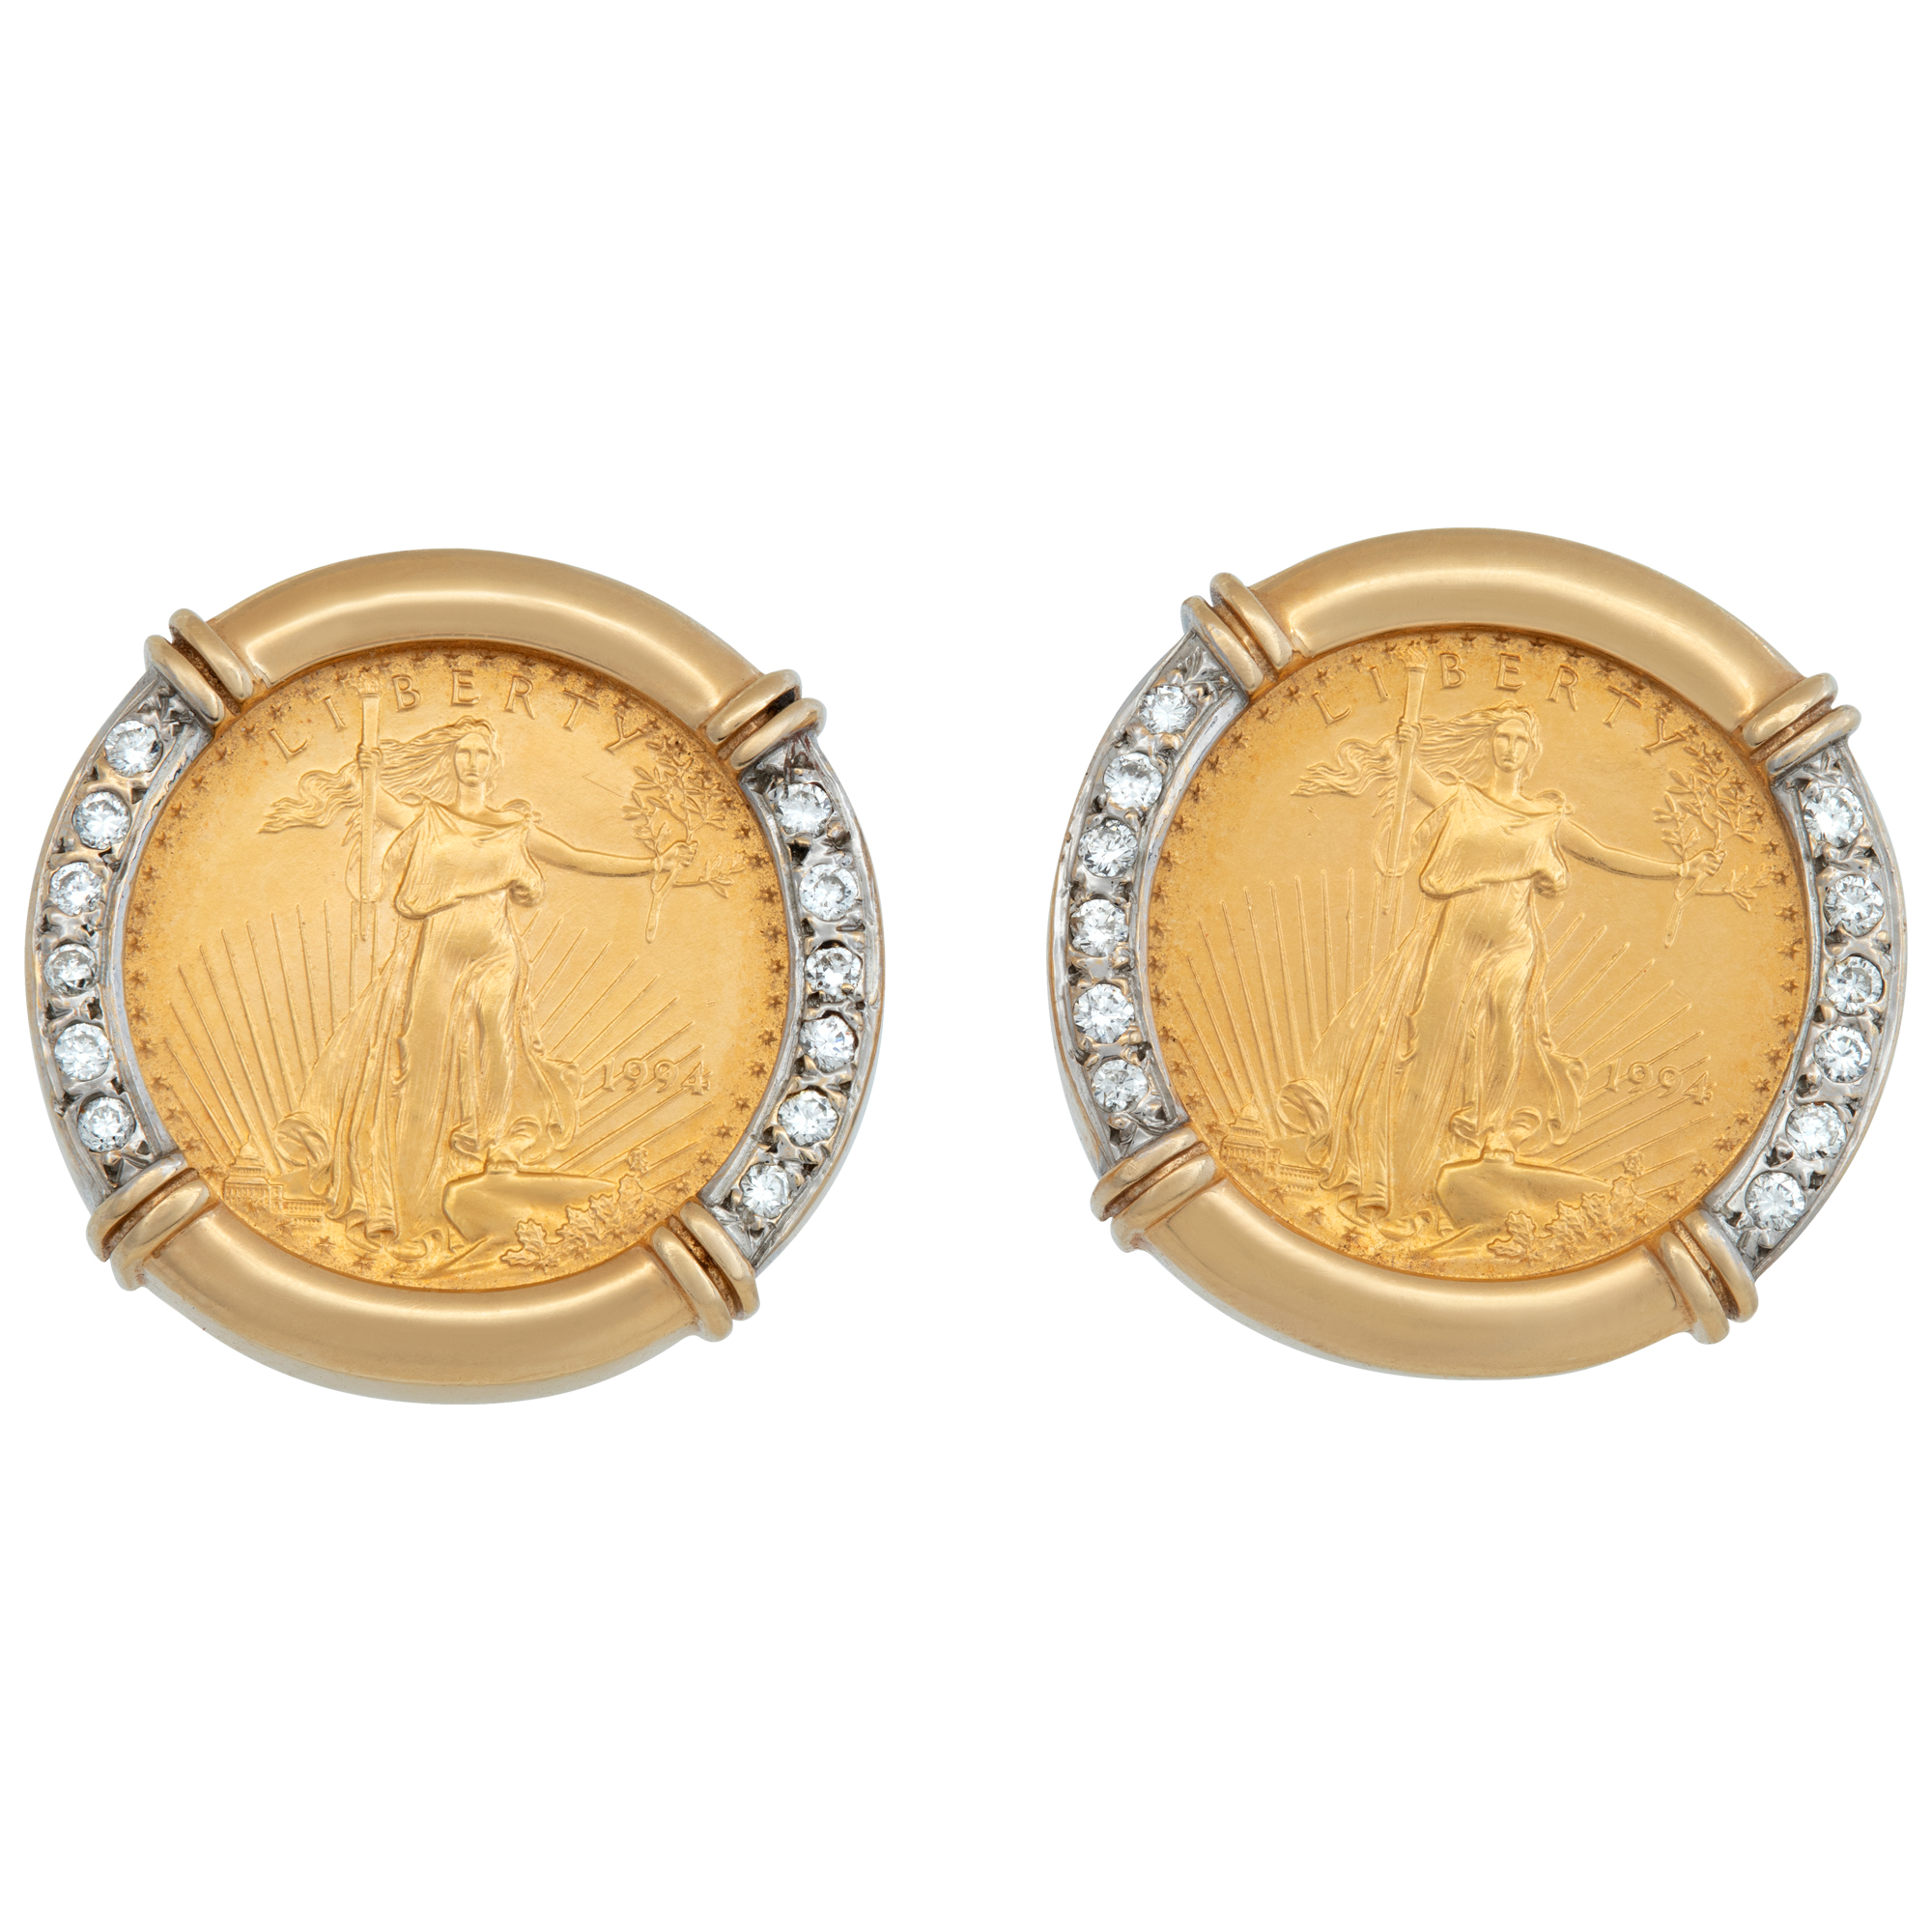 Five Dollar Us Gold Coin Cufflinks With Diamond Accents Set In 14k Gold